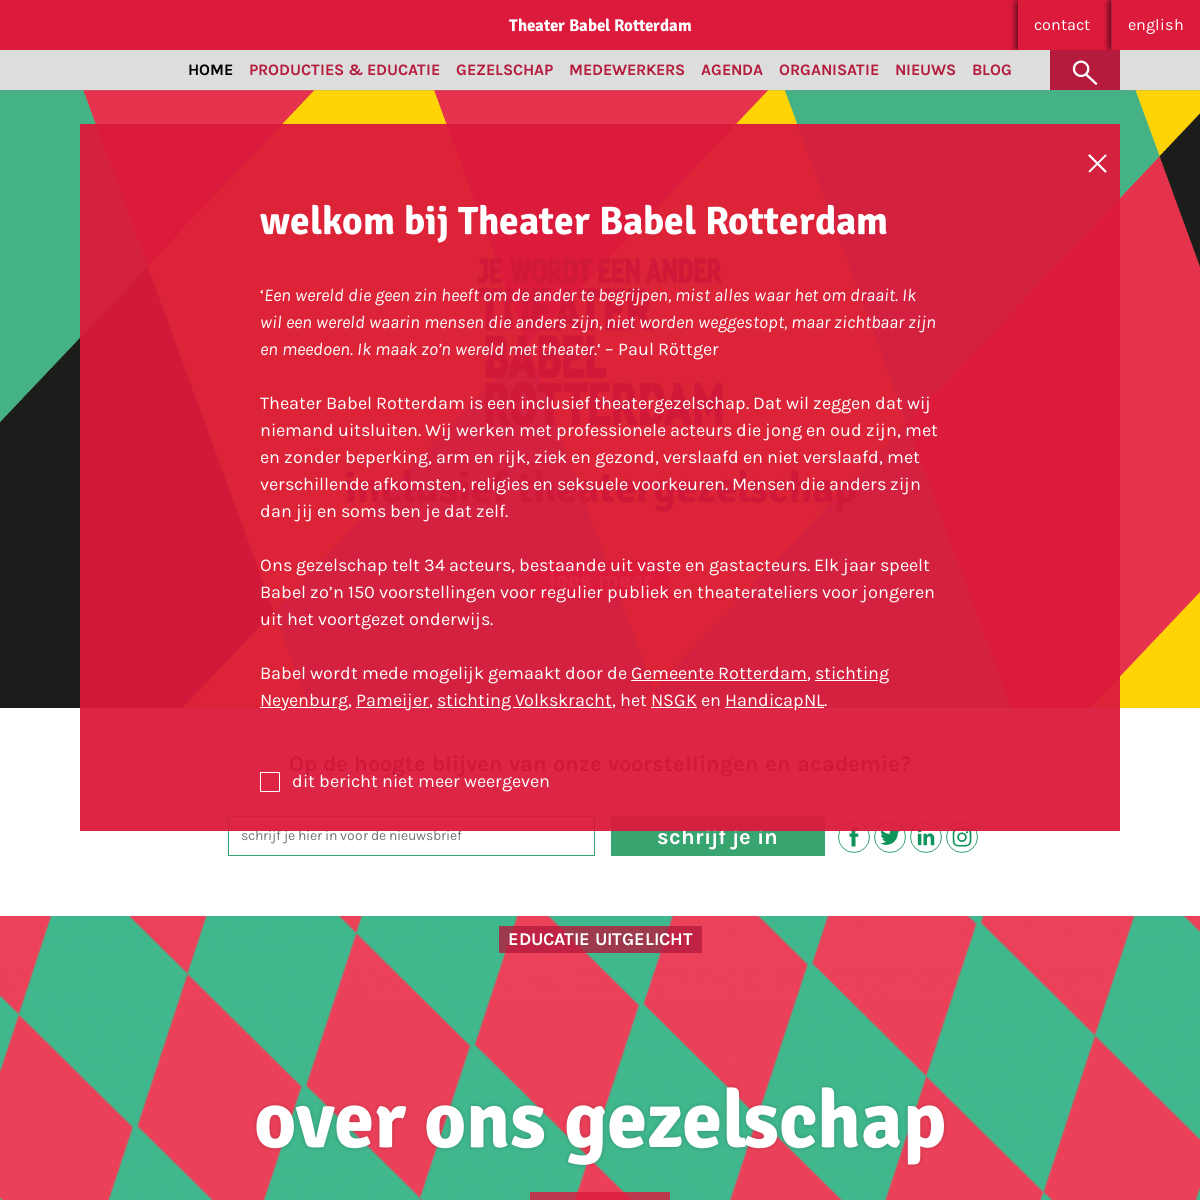 A complete backup of theaterbabelrotterdam.nl